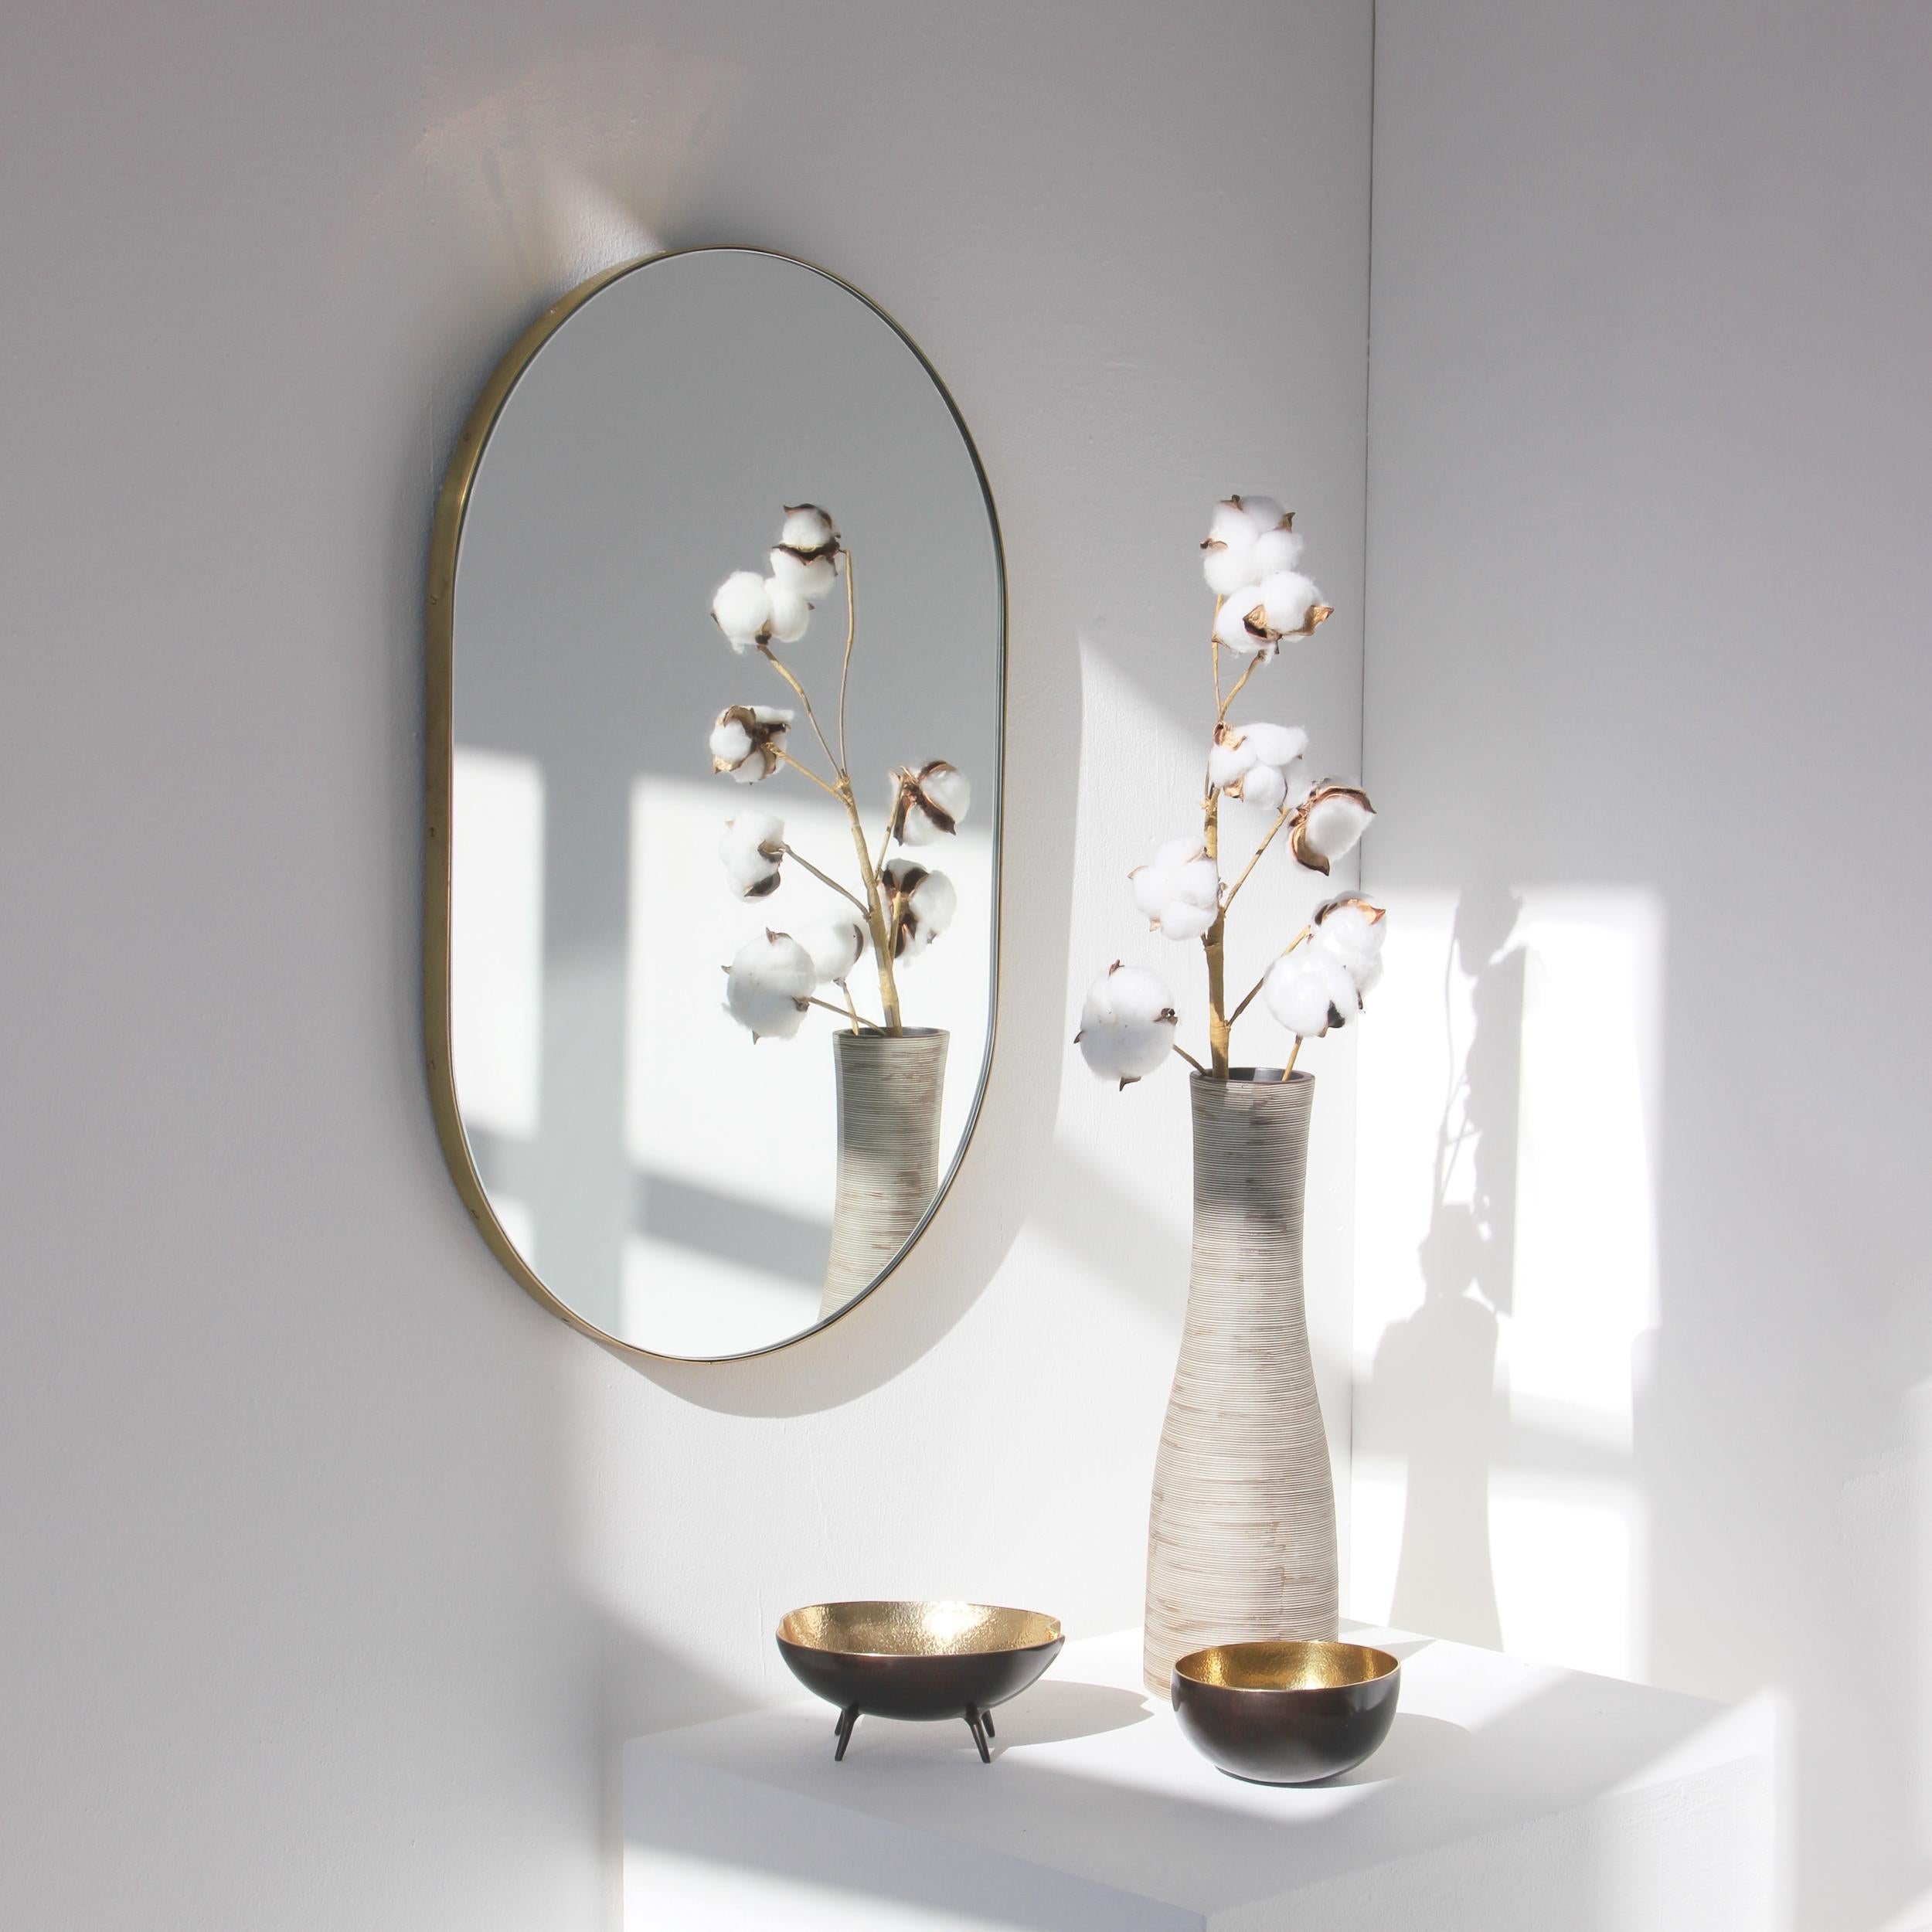 Delightful handcrafted capsule shaped mirror with a solid brushed brass frame. Designed and handcrafted in London, UK.

Medium, large and extra-large (37cm x 56cm, 46cm x 71cm and 48cm x 97cm) mirrors are fitted with an ingenious French cleat (split